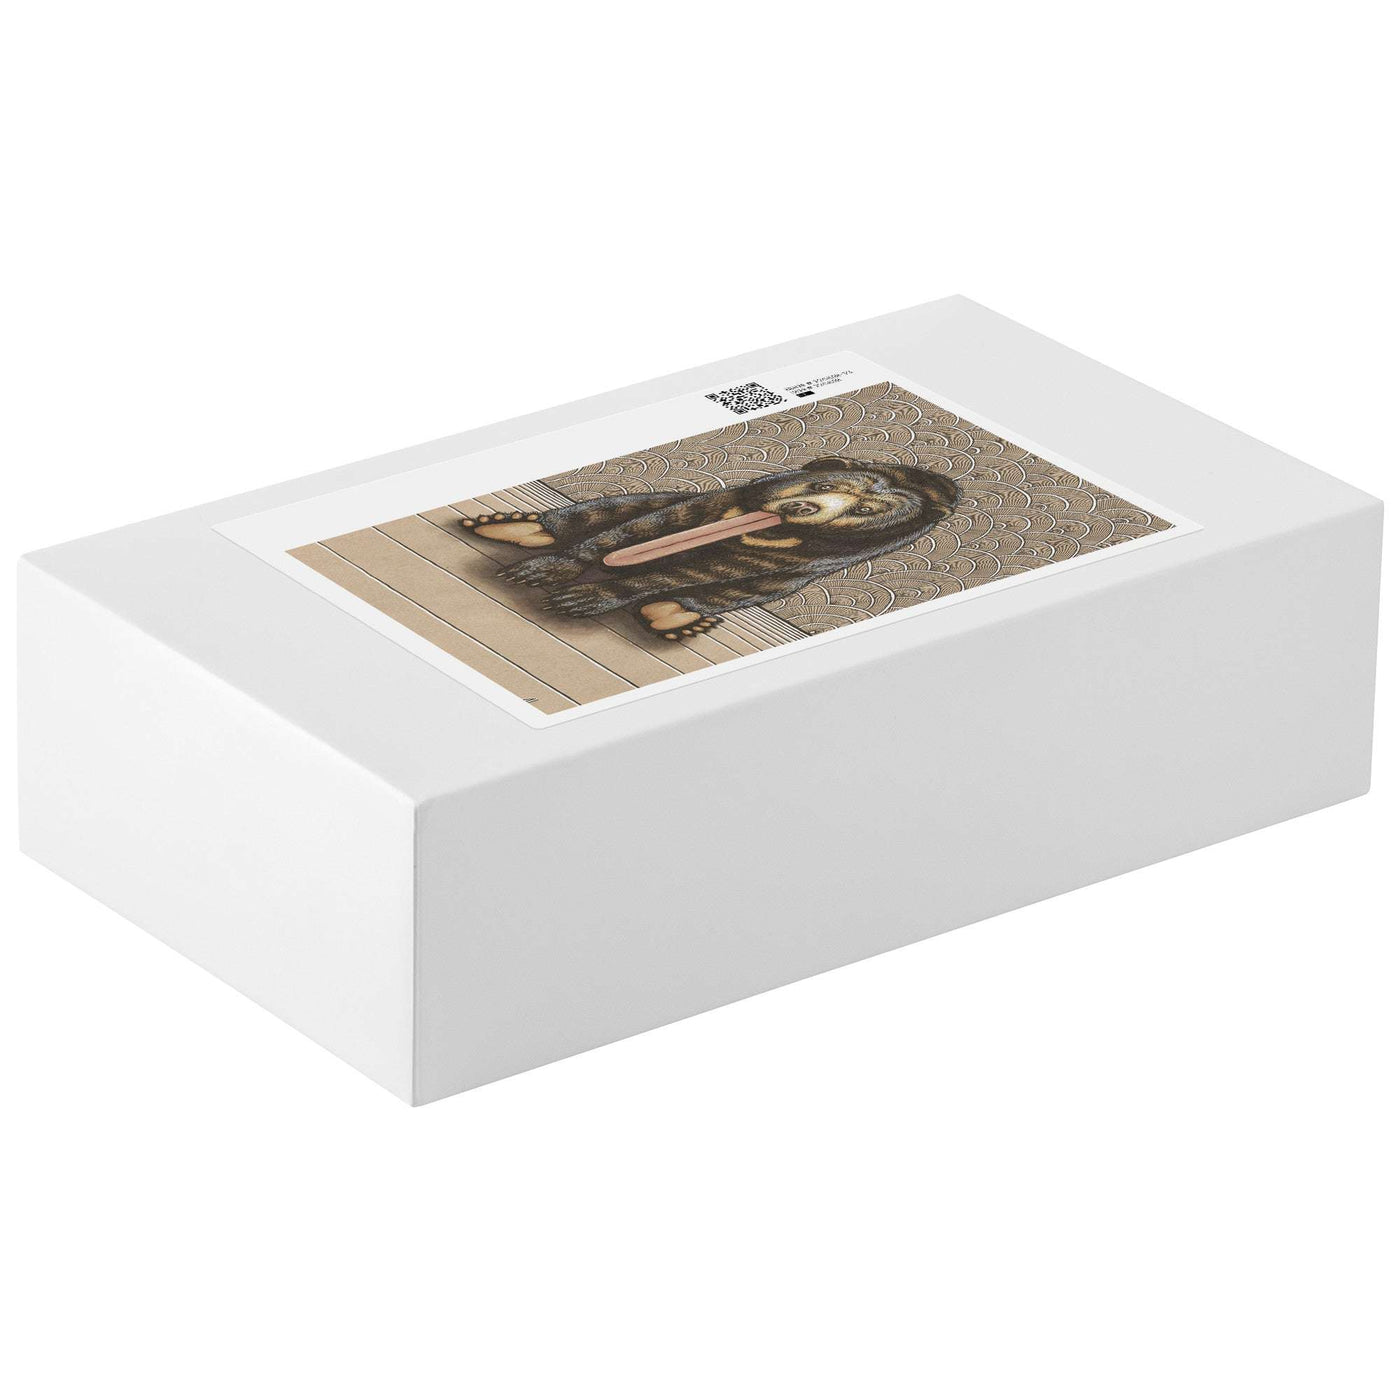 White rectangular puzzle box with a printed label on top showcasing a illustration of the completed Sun Bear Puzzle.